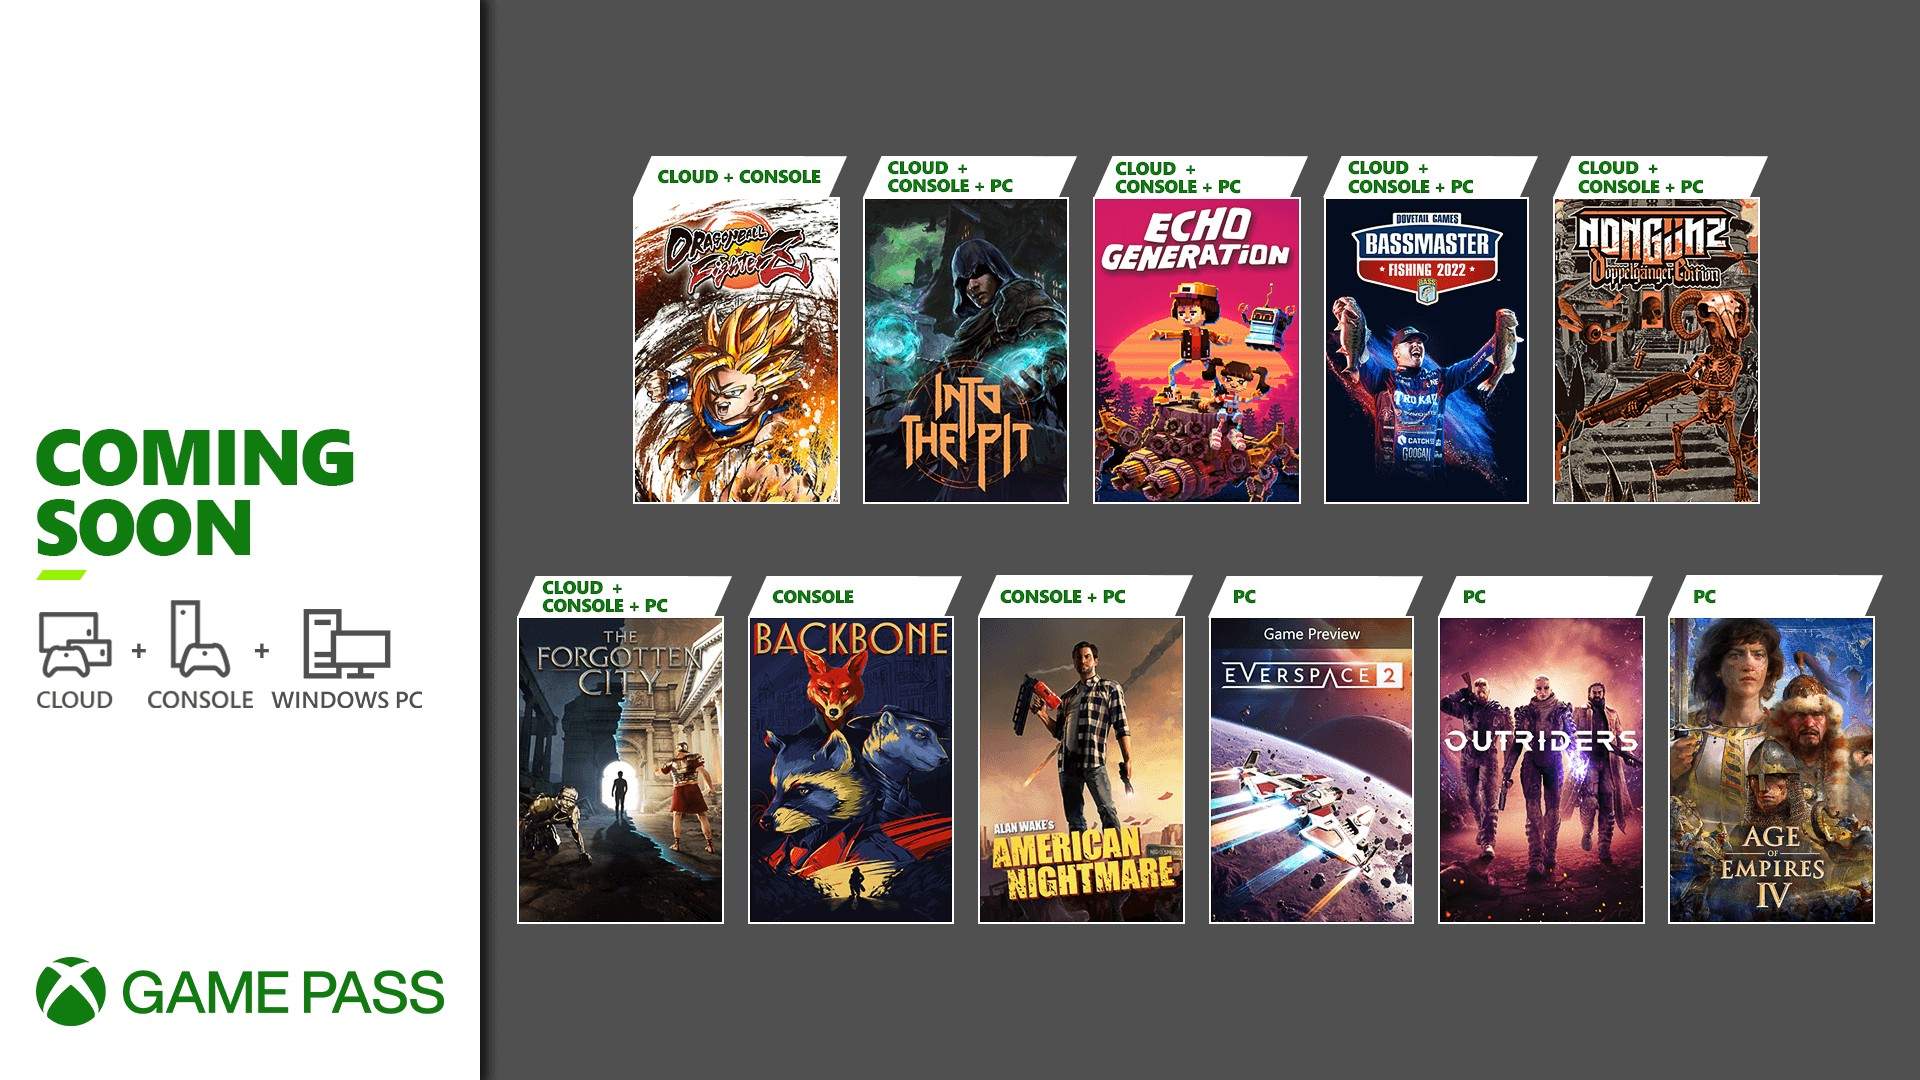 New titles arriving on Xbox Game Pass in the second half of October have been revealed - we already know the following titles coming to Xbox Game Pass in the second half of October for Xbox, PC, and Cloud.